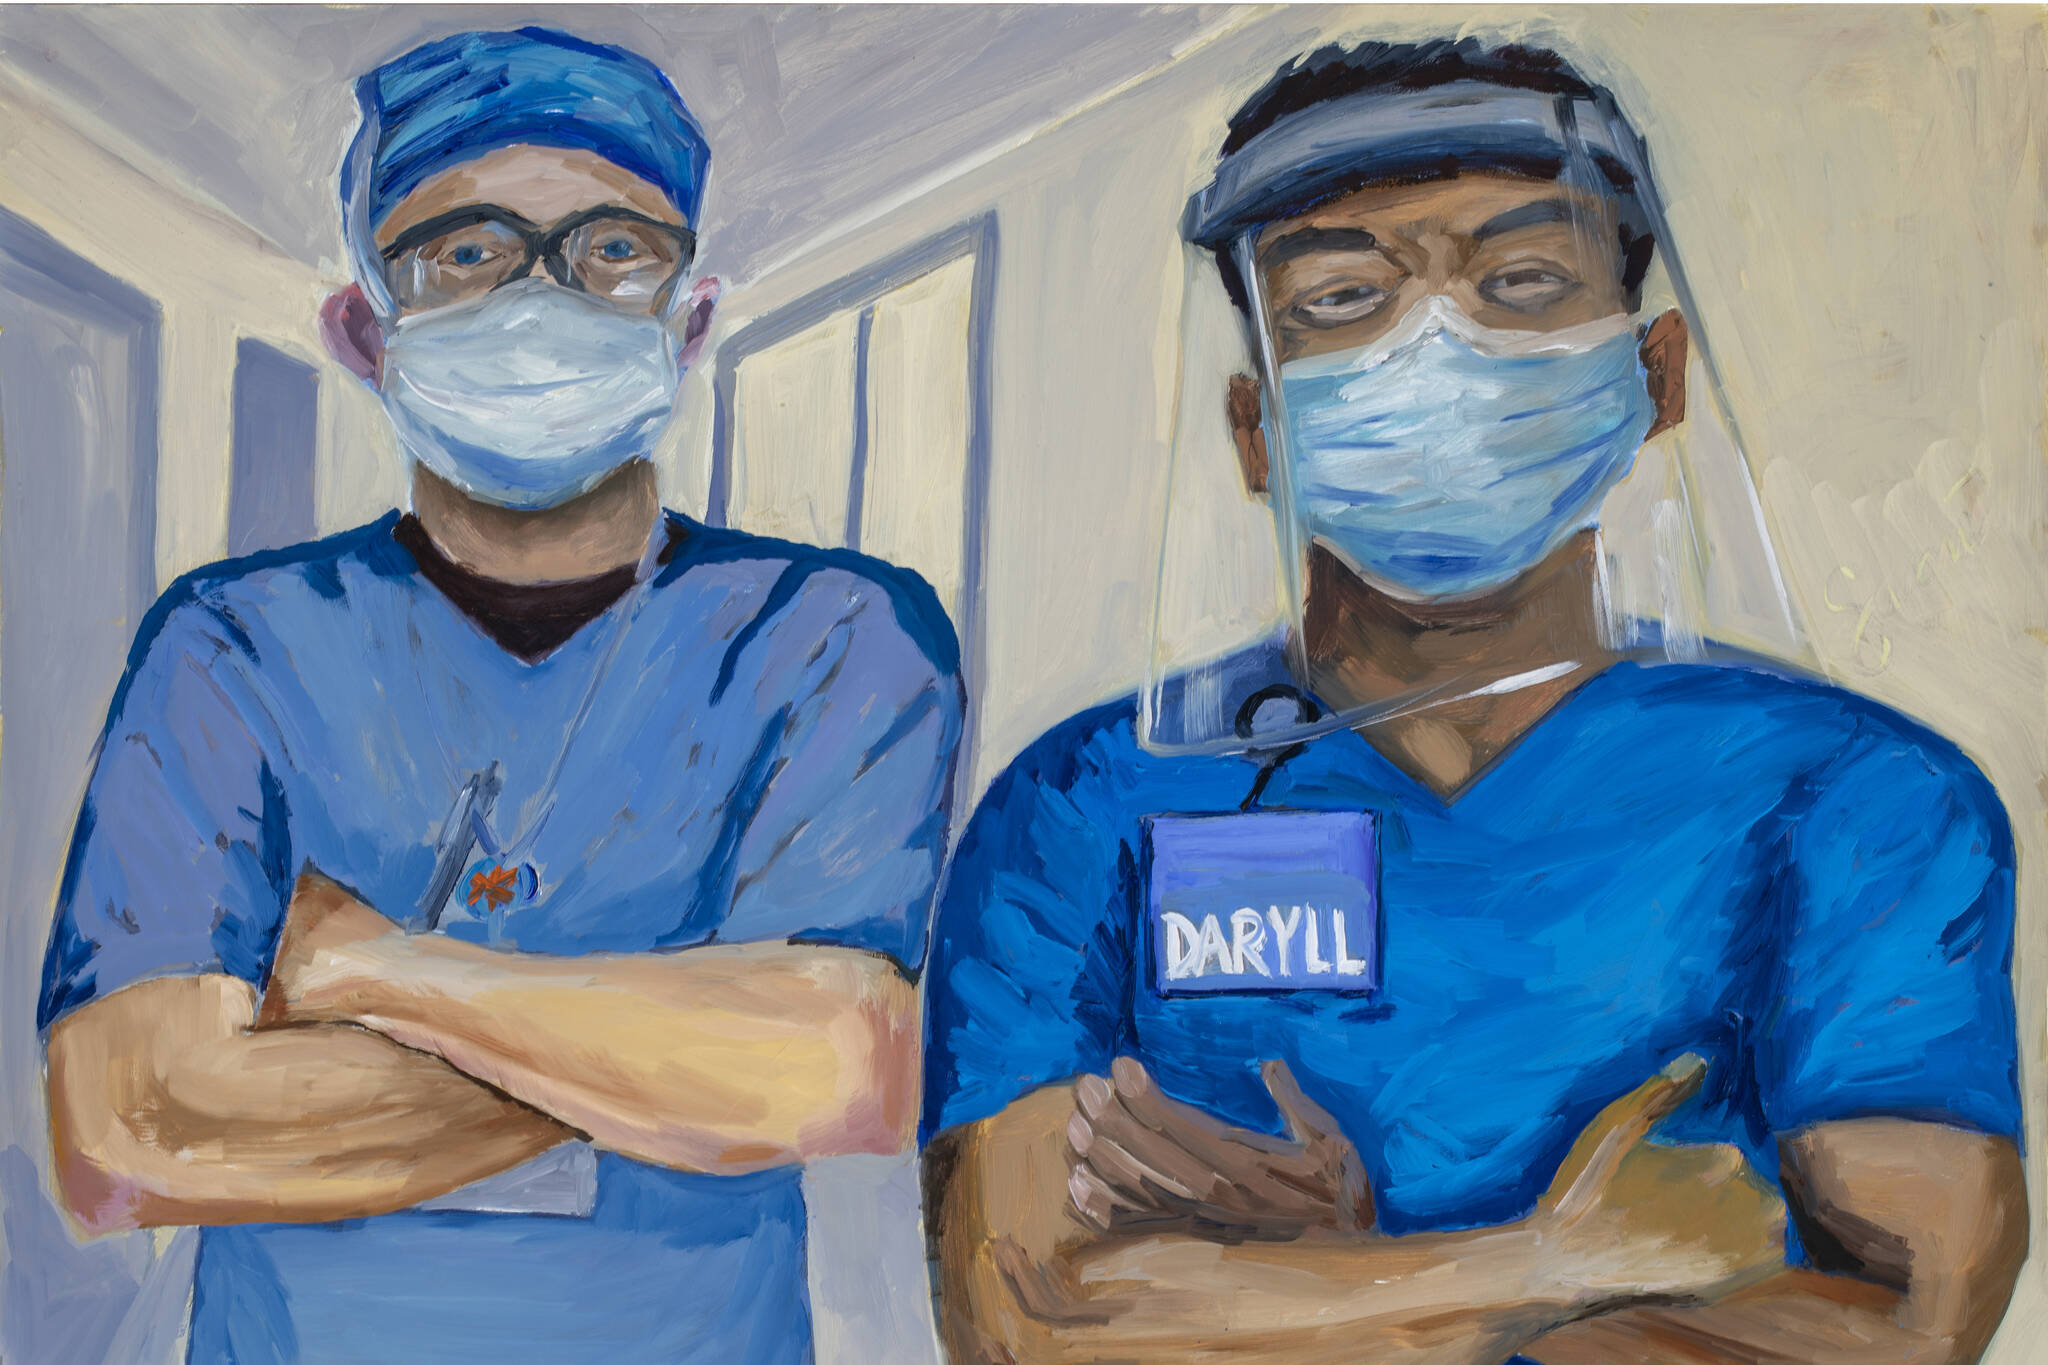 Dr. Sami Ali's painting of two healthcare workers is part of her show, "The Mind of A Healthcare Worker During the COVID-19 Pandemic," opening Friday, Jan. 7, 2022, at the Homer Council on the Arts. (Photo by Amber Johnson)